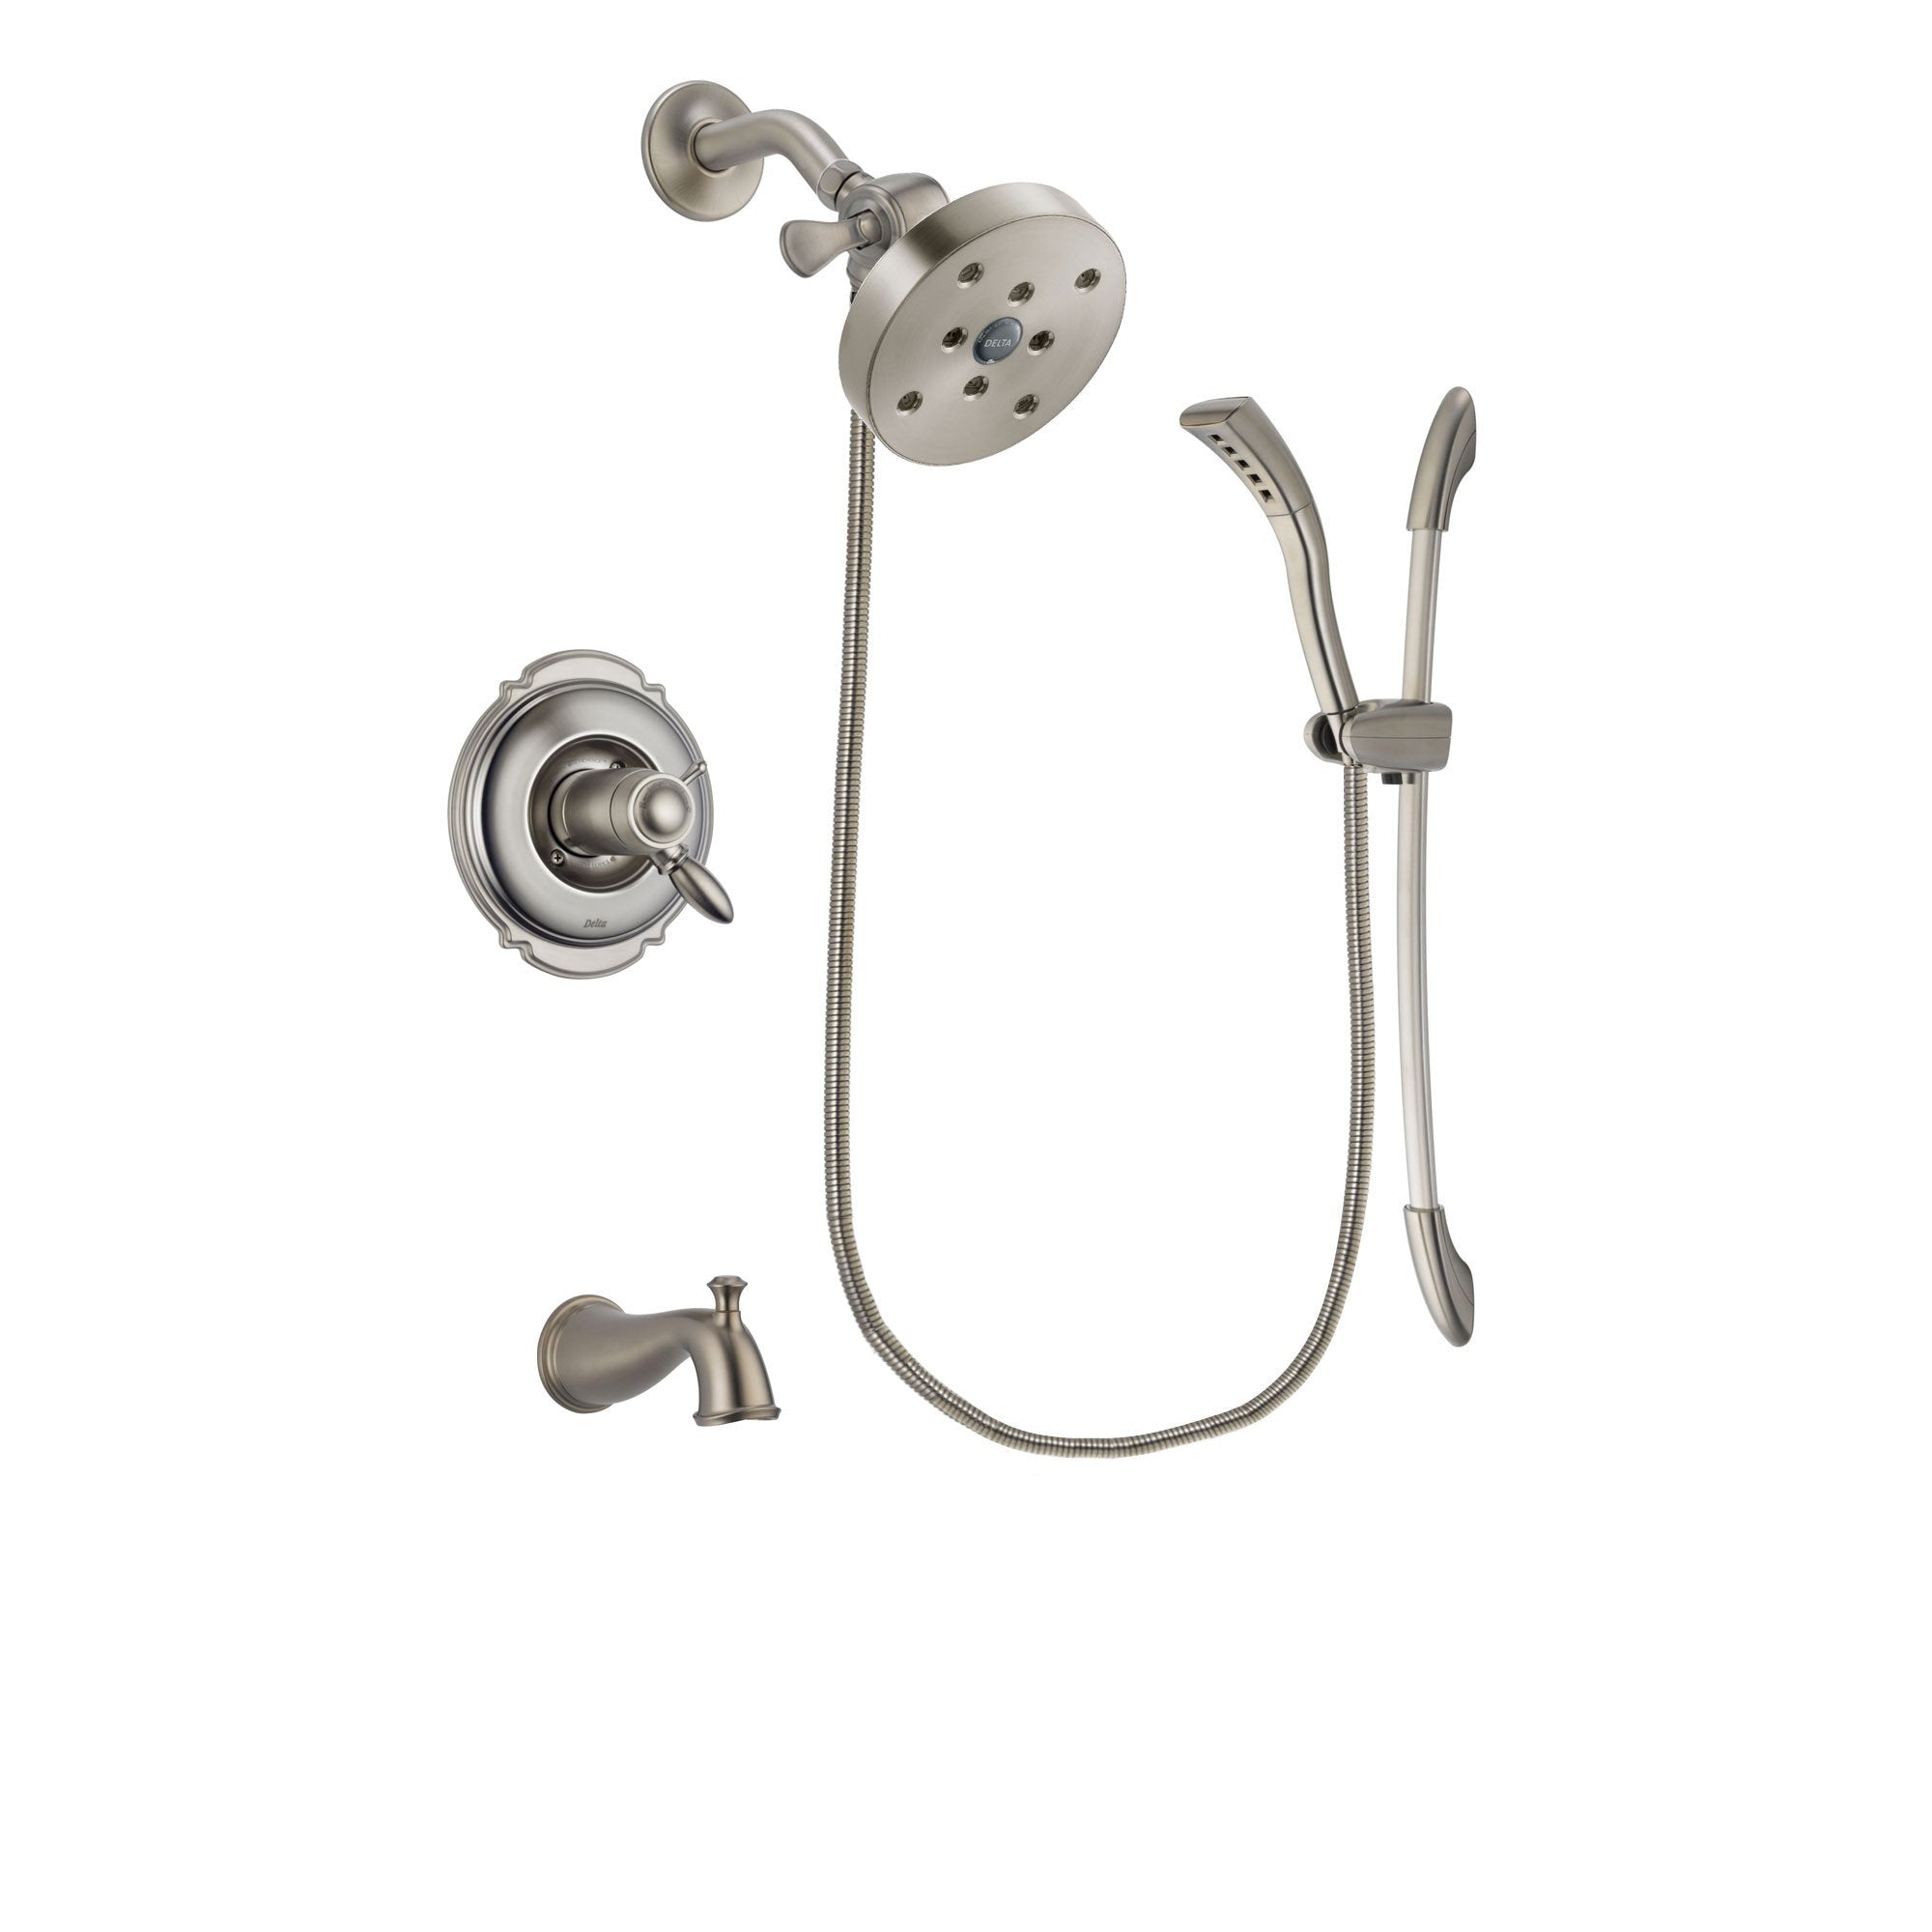 Delta Victorian Stainless Steel Finish Thermostatic Tub and Shower Faucet System Package with 5-1/2 inch Shower Head and Handshower with Slide Bar Includes Rough-in Valve and Tub Spout DSP1481V